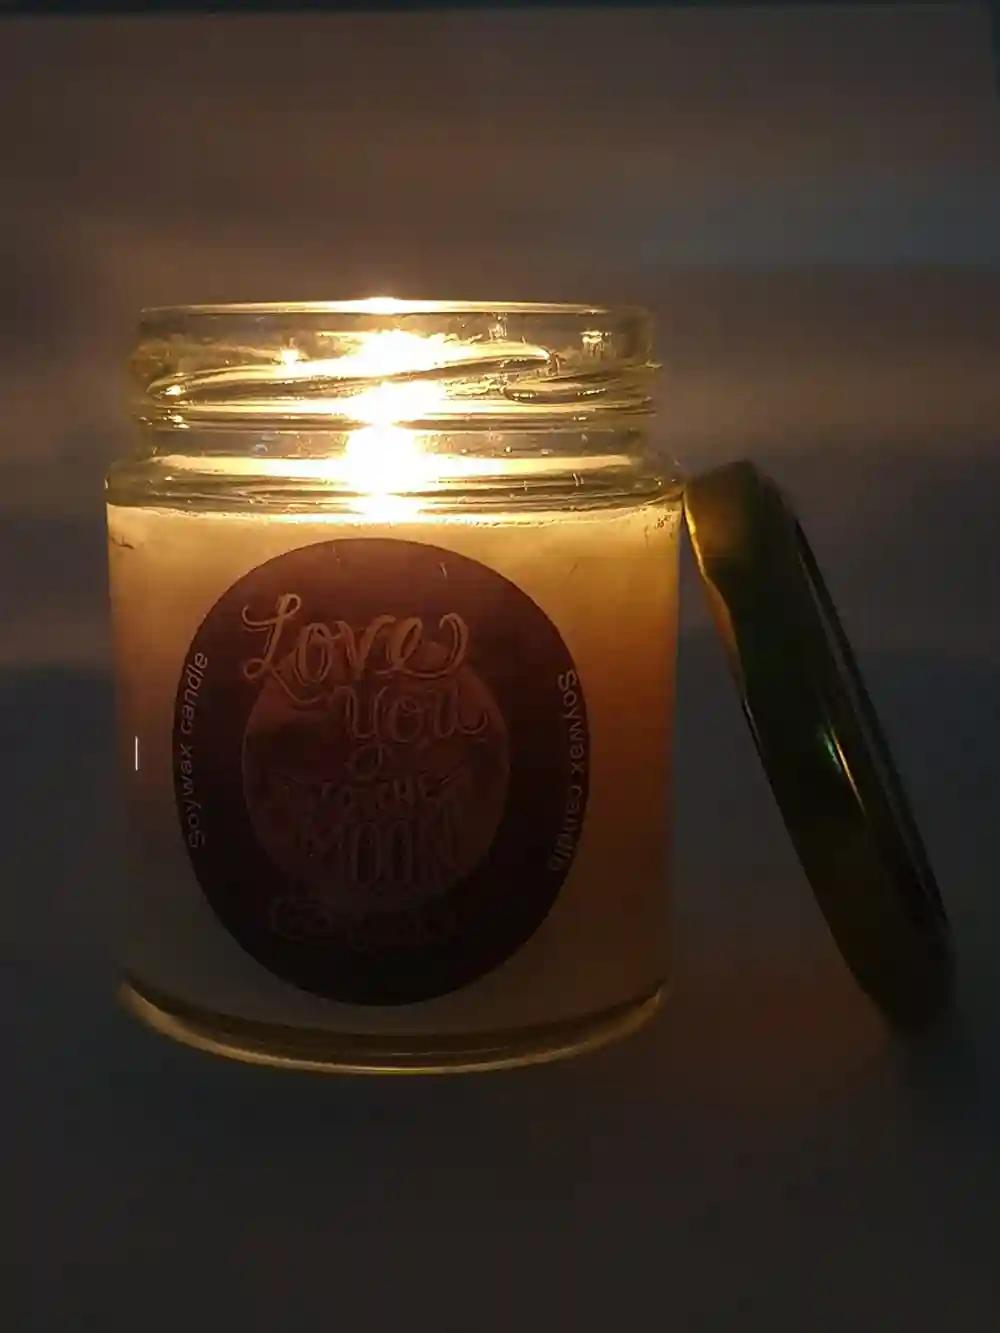 Pratha Naturals Scented Candle (Love You to the Moon)